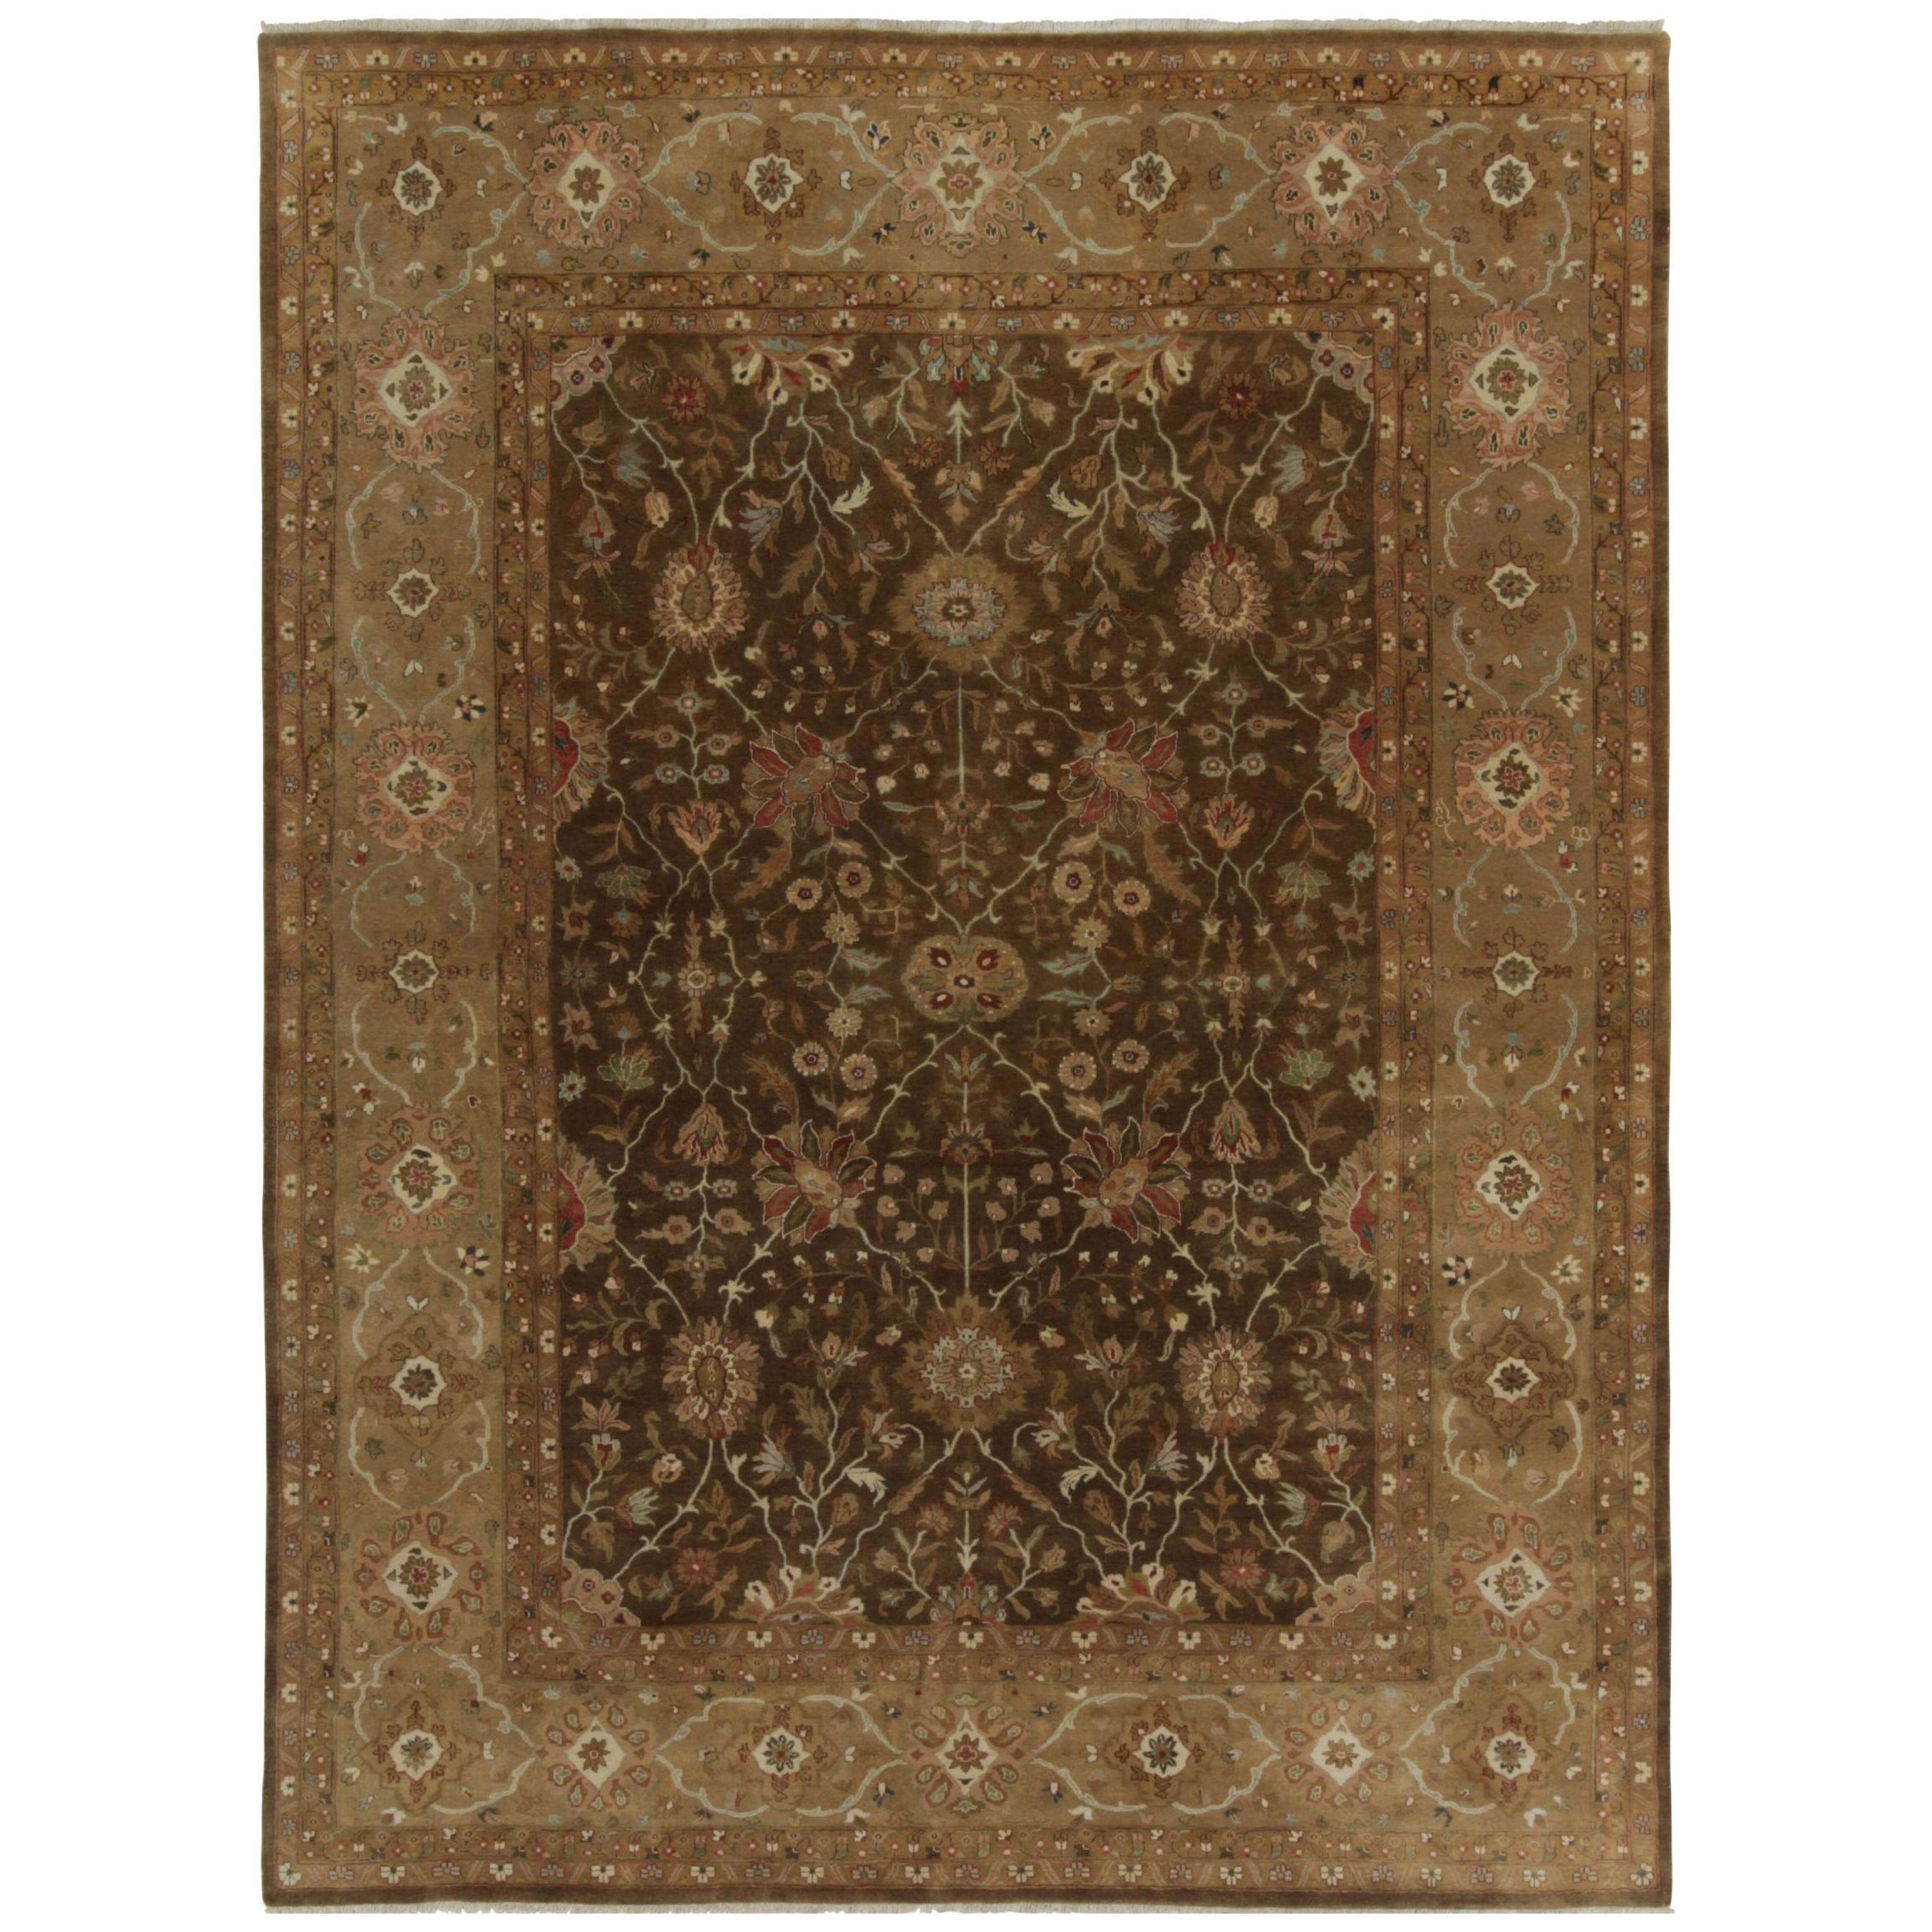 Rug & Kilim’s Tabriz Style Rug in Brown, Gold and Green Floral Patterns